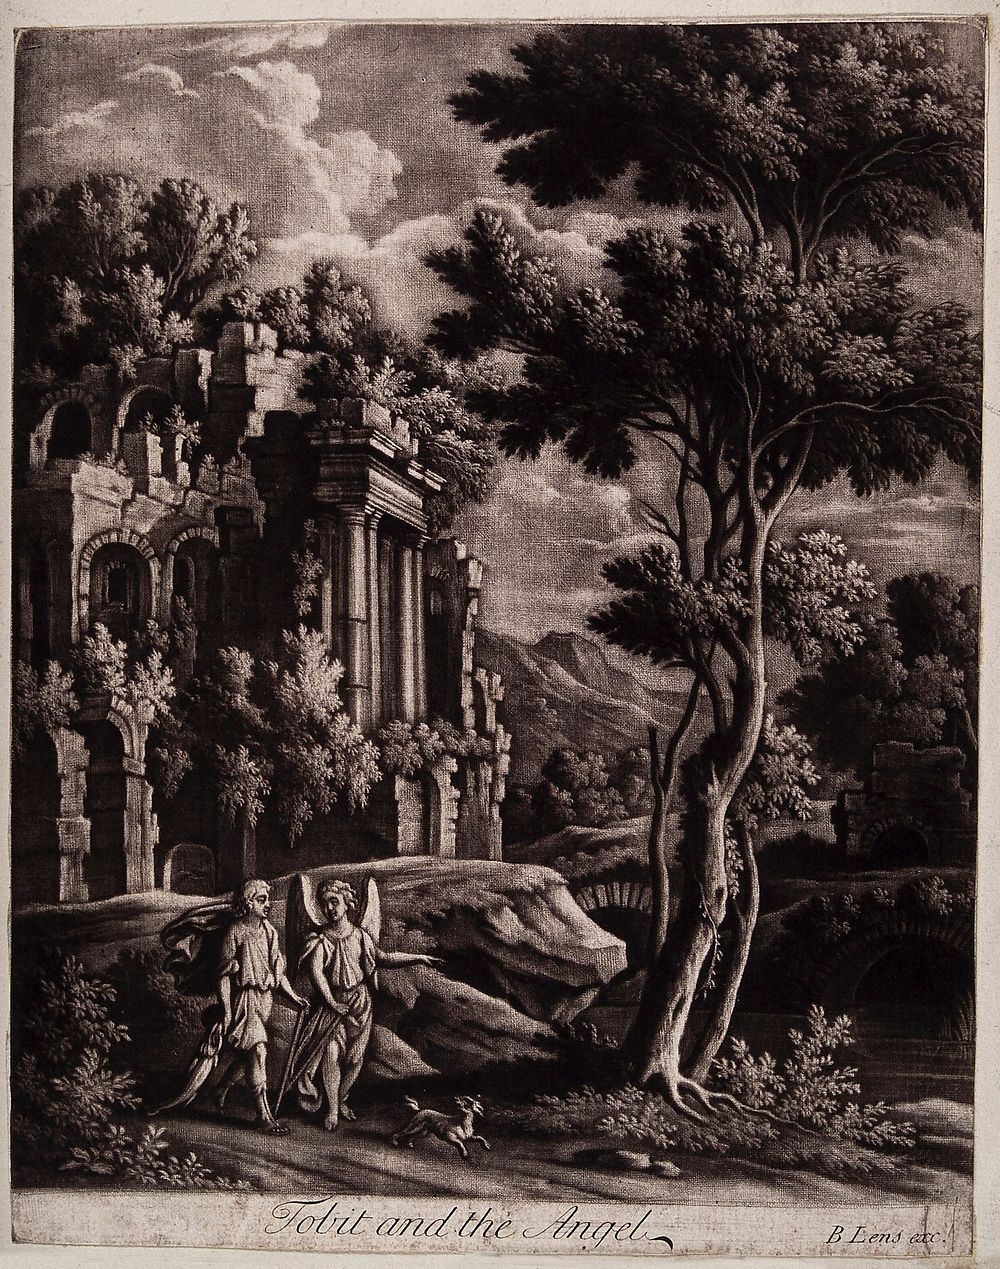 Tobias and the angel stroll through a classical landscape. Mezzotint by B. Lens.